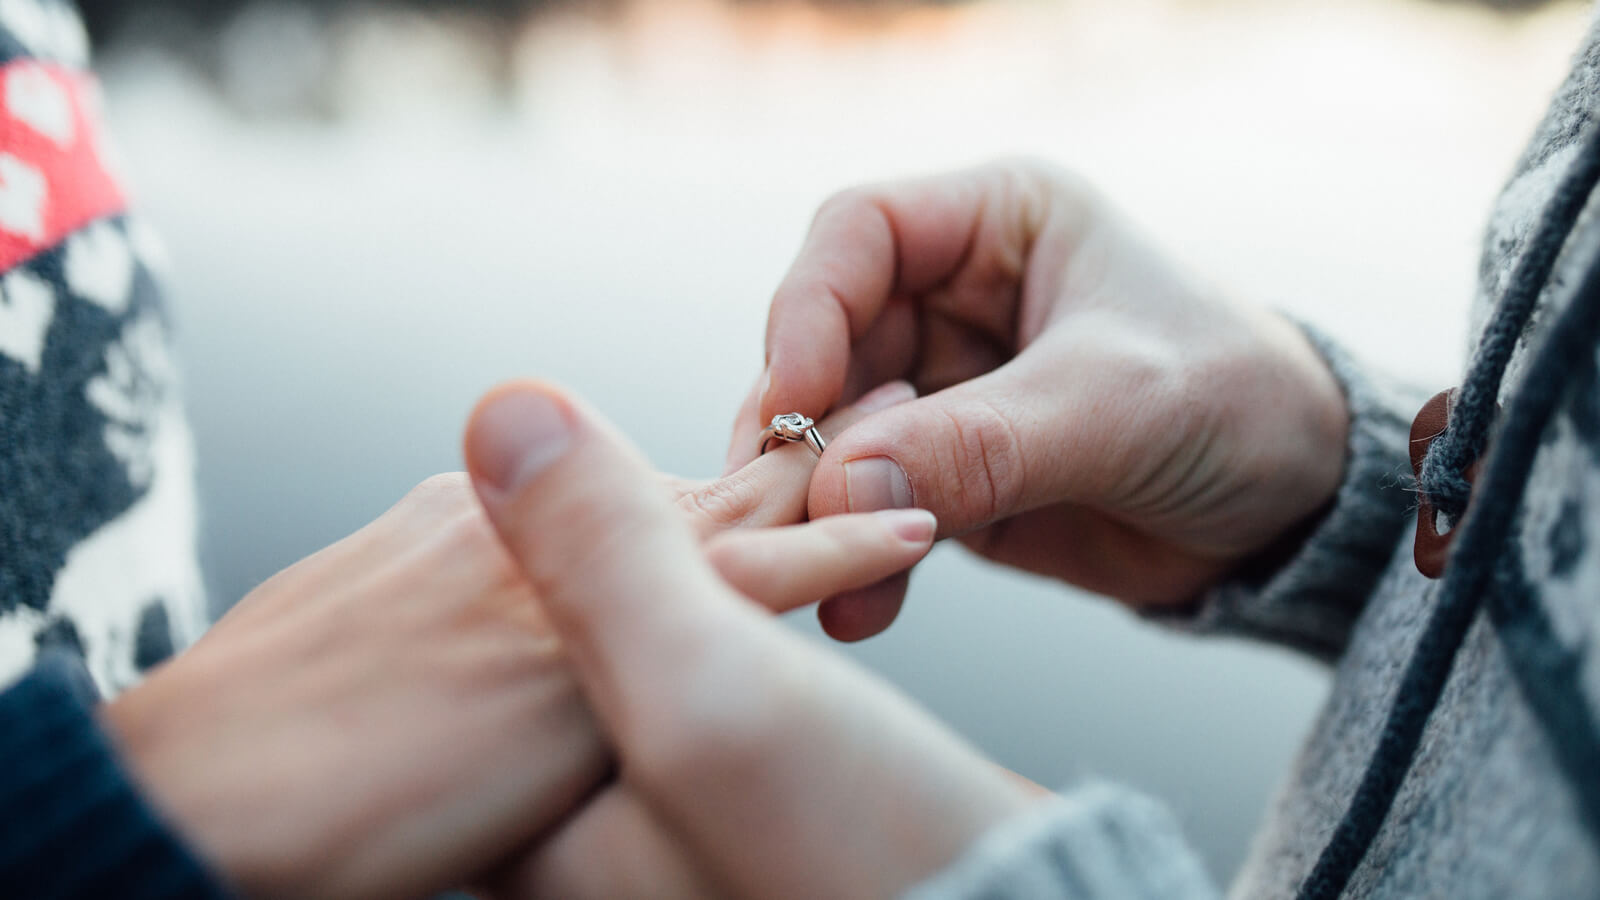 Picture of man putting engagement silver ring on woman hand, outdoor. Sea or river background.